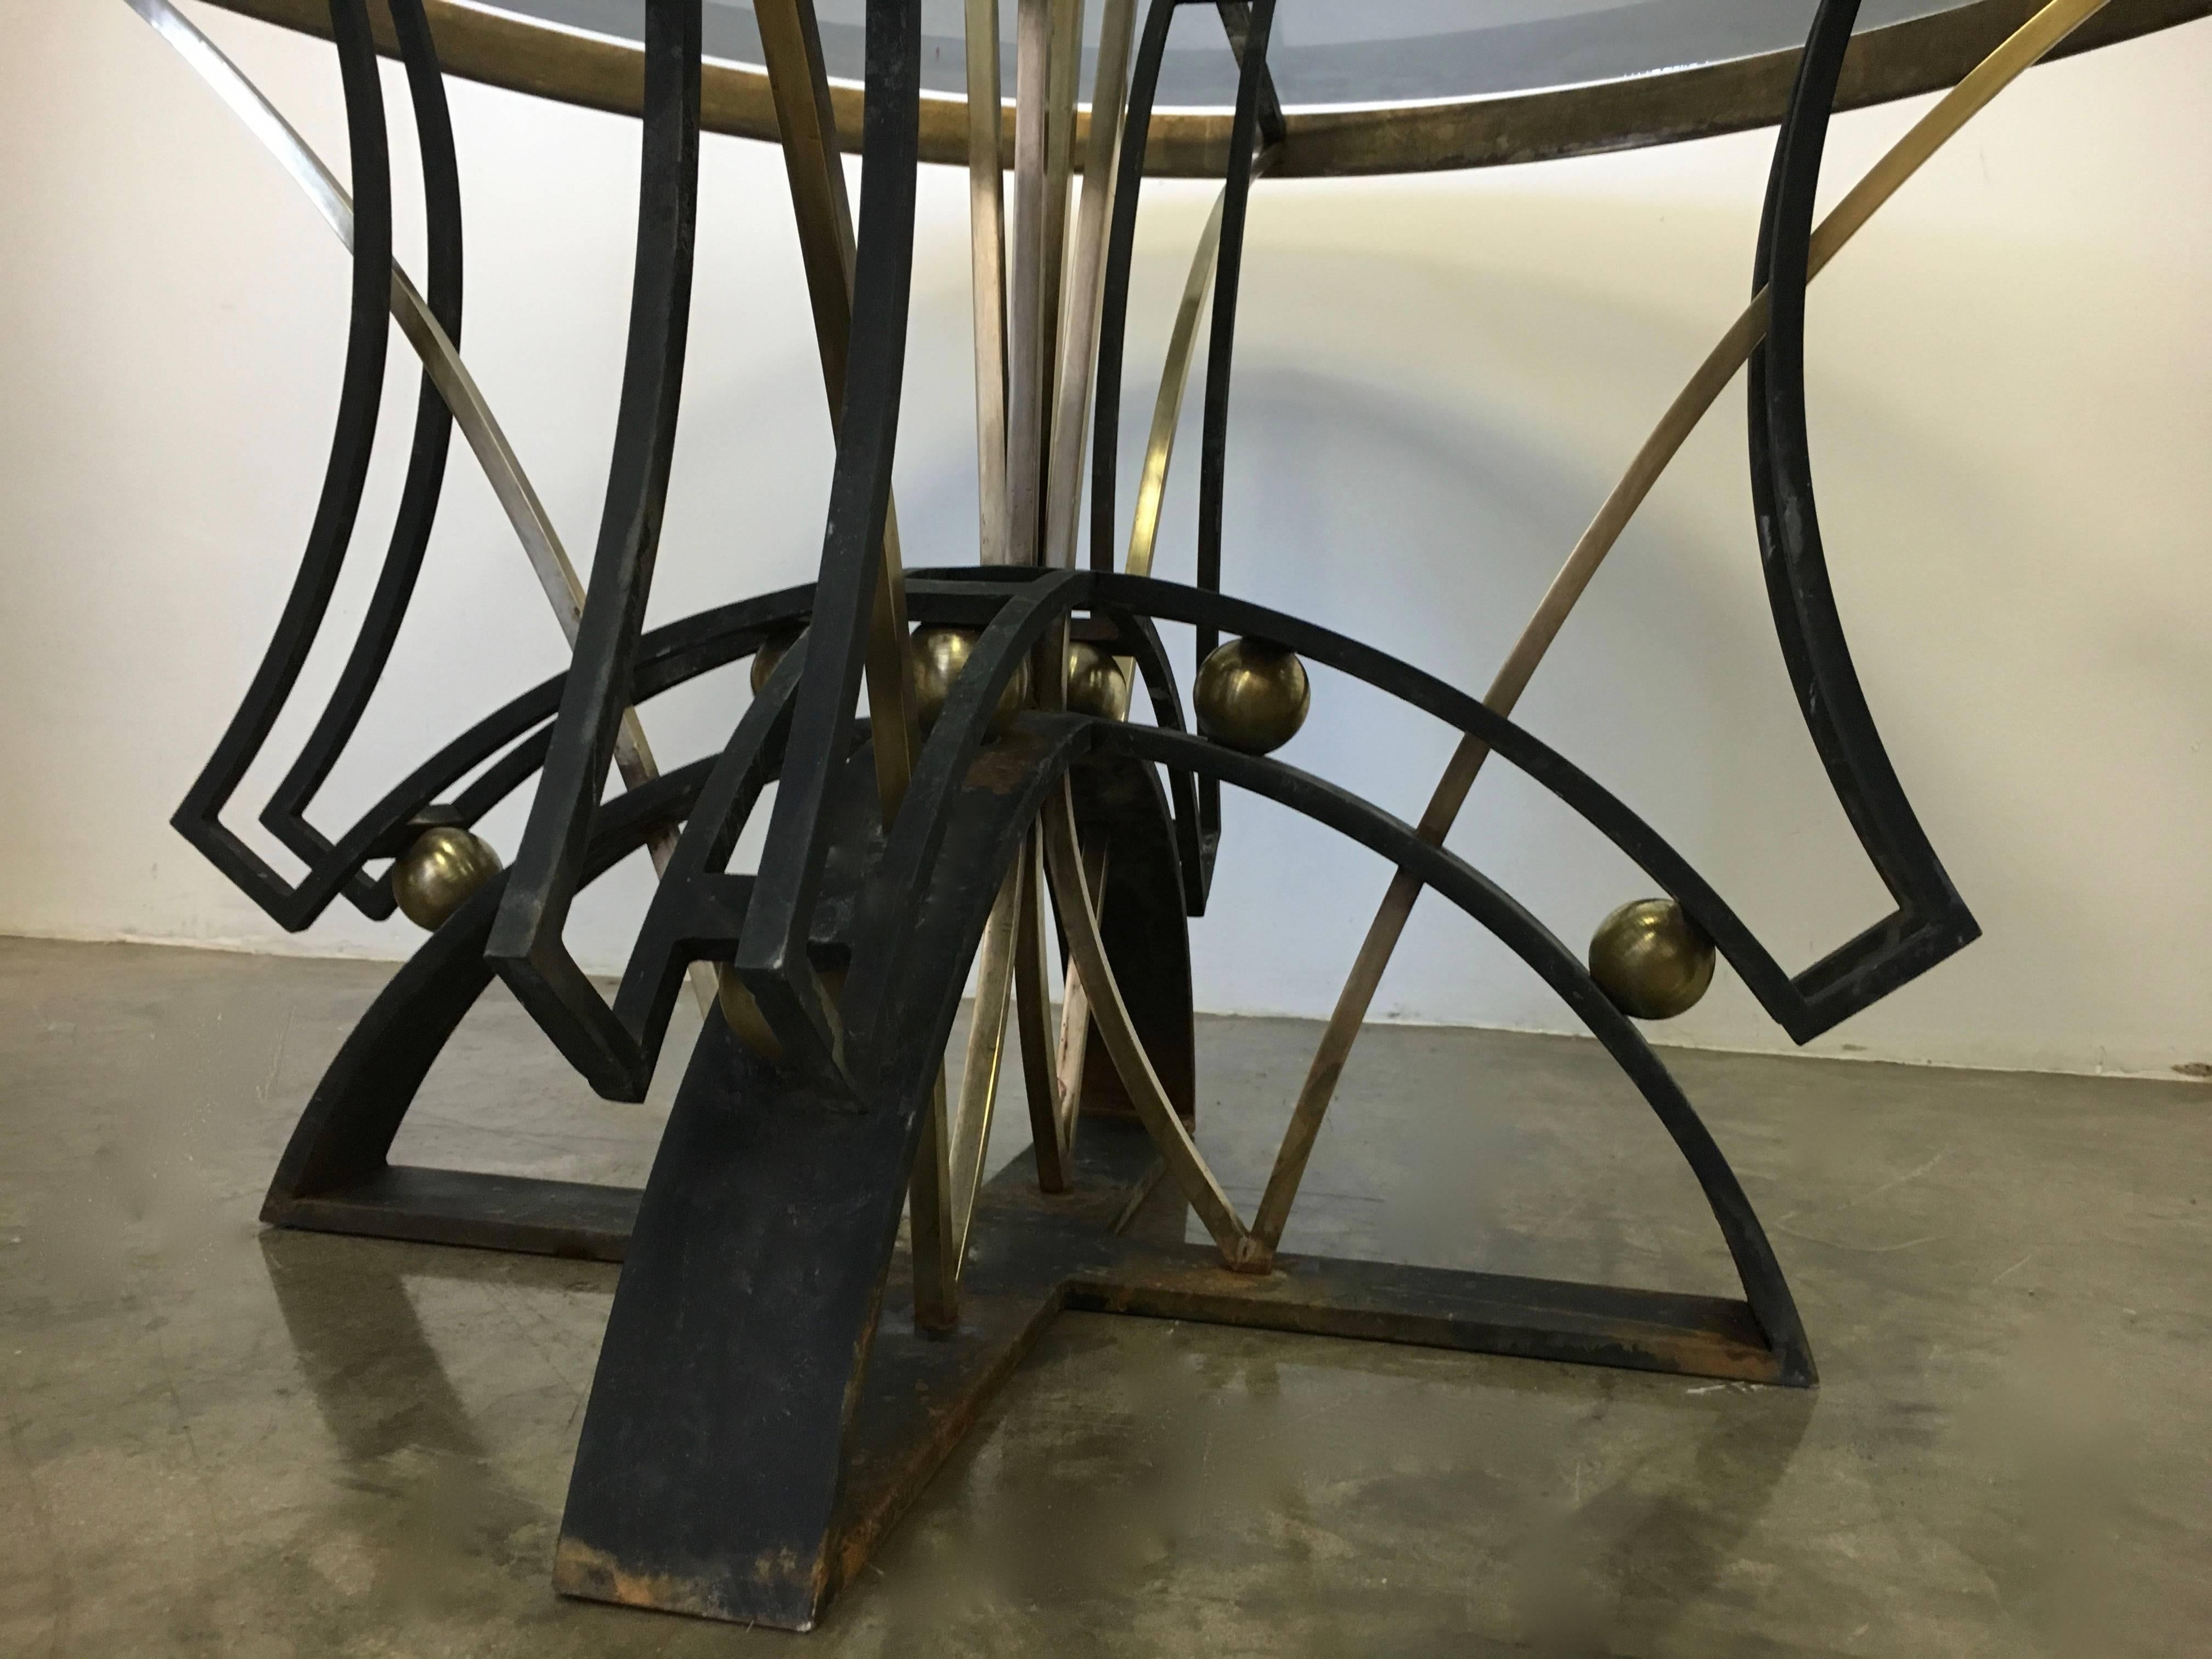 Superb Iron and Brass Round Dining Table by Arturo Pani, Mexico City circa 1950s For Sale 2